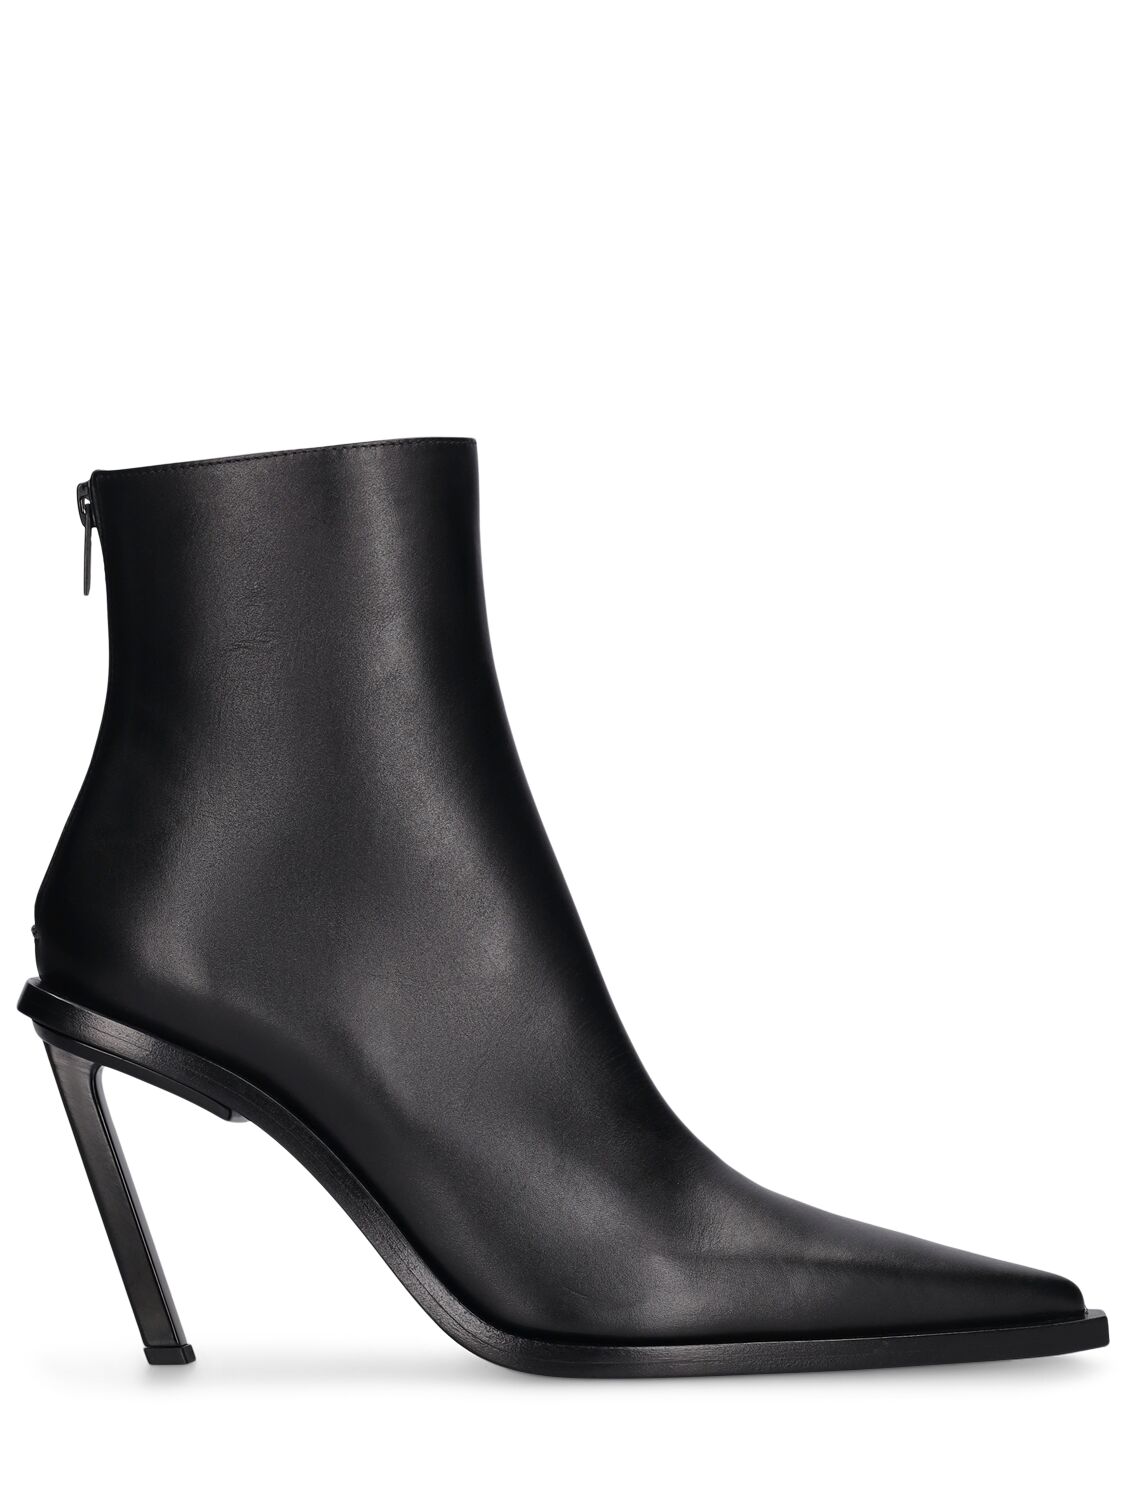 Image of 90mm Anic High Heel Leather Ankle Boots